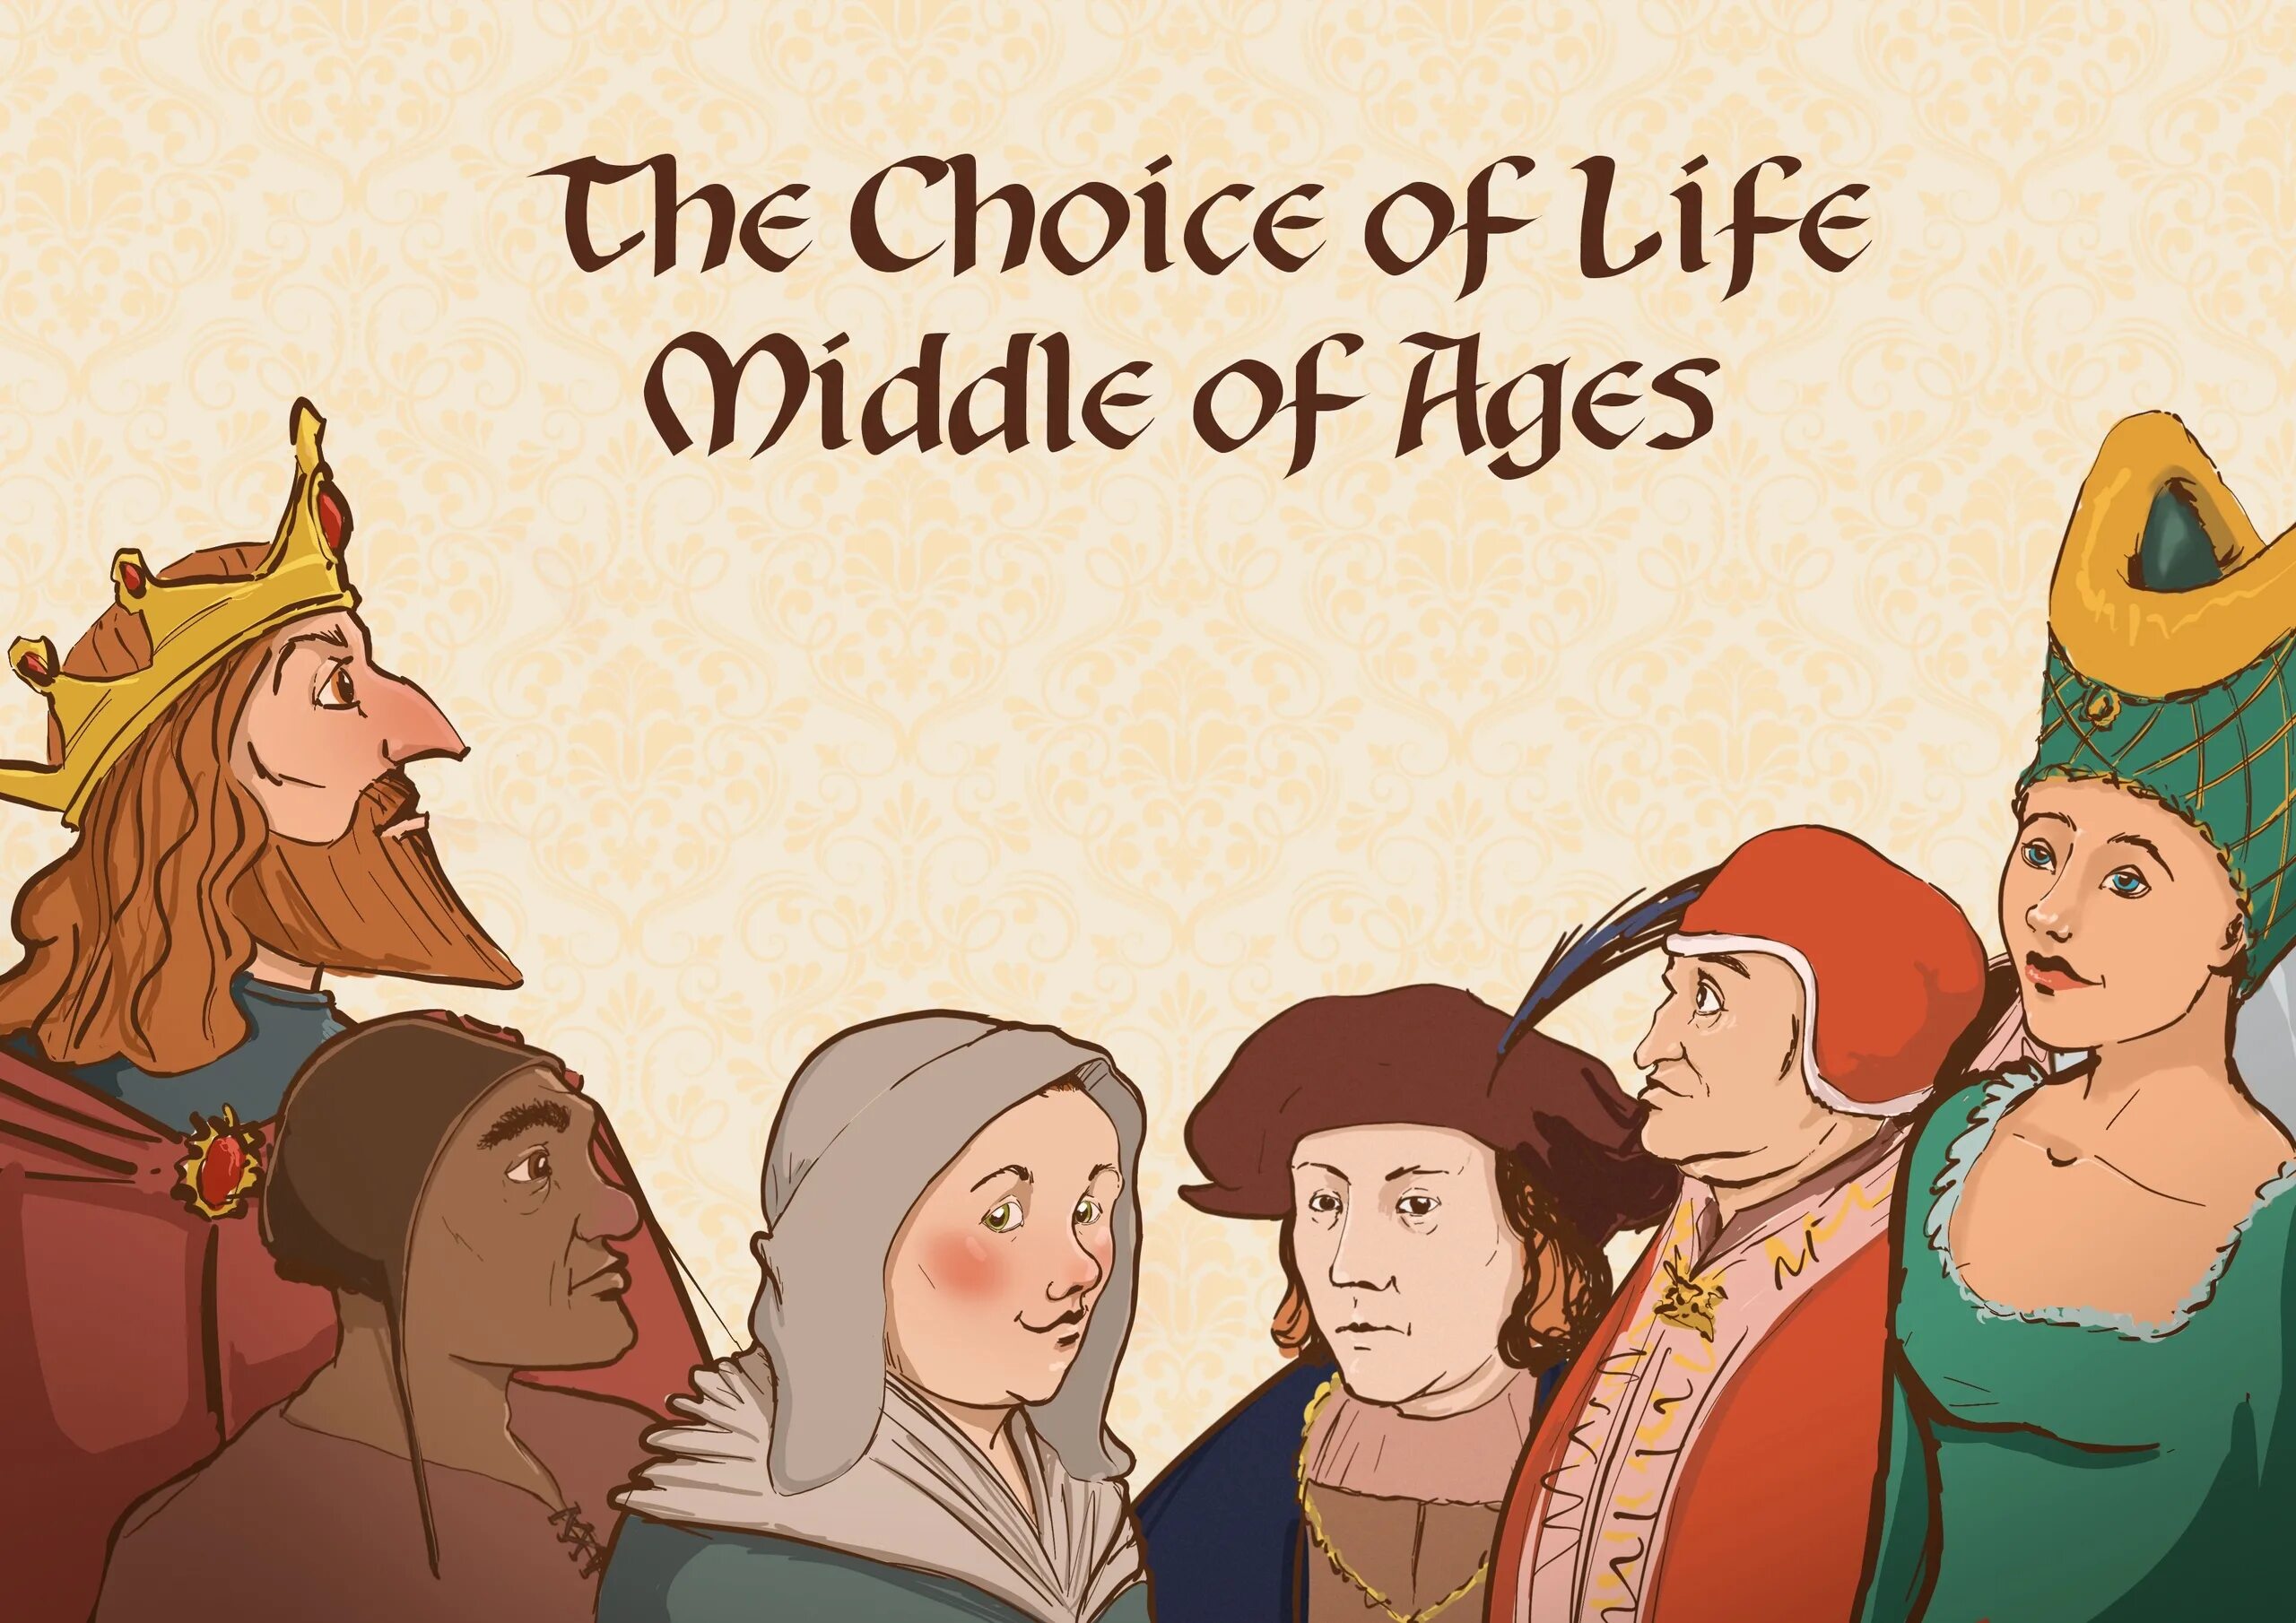 Игра the choice of Life Middle. The choice of Life Middle ages игра. The choice of Life Middle ages карта. Выбор жизни средние века. Middle ages 1